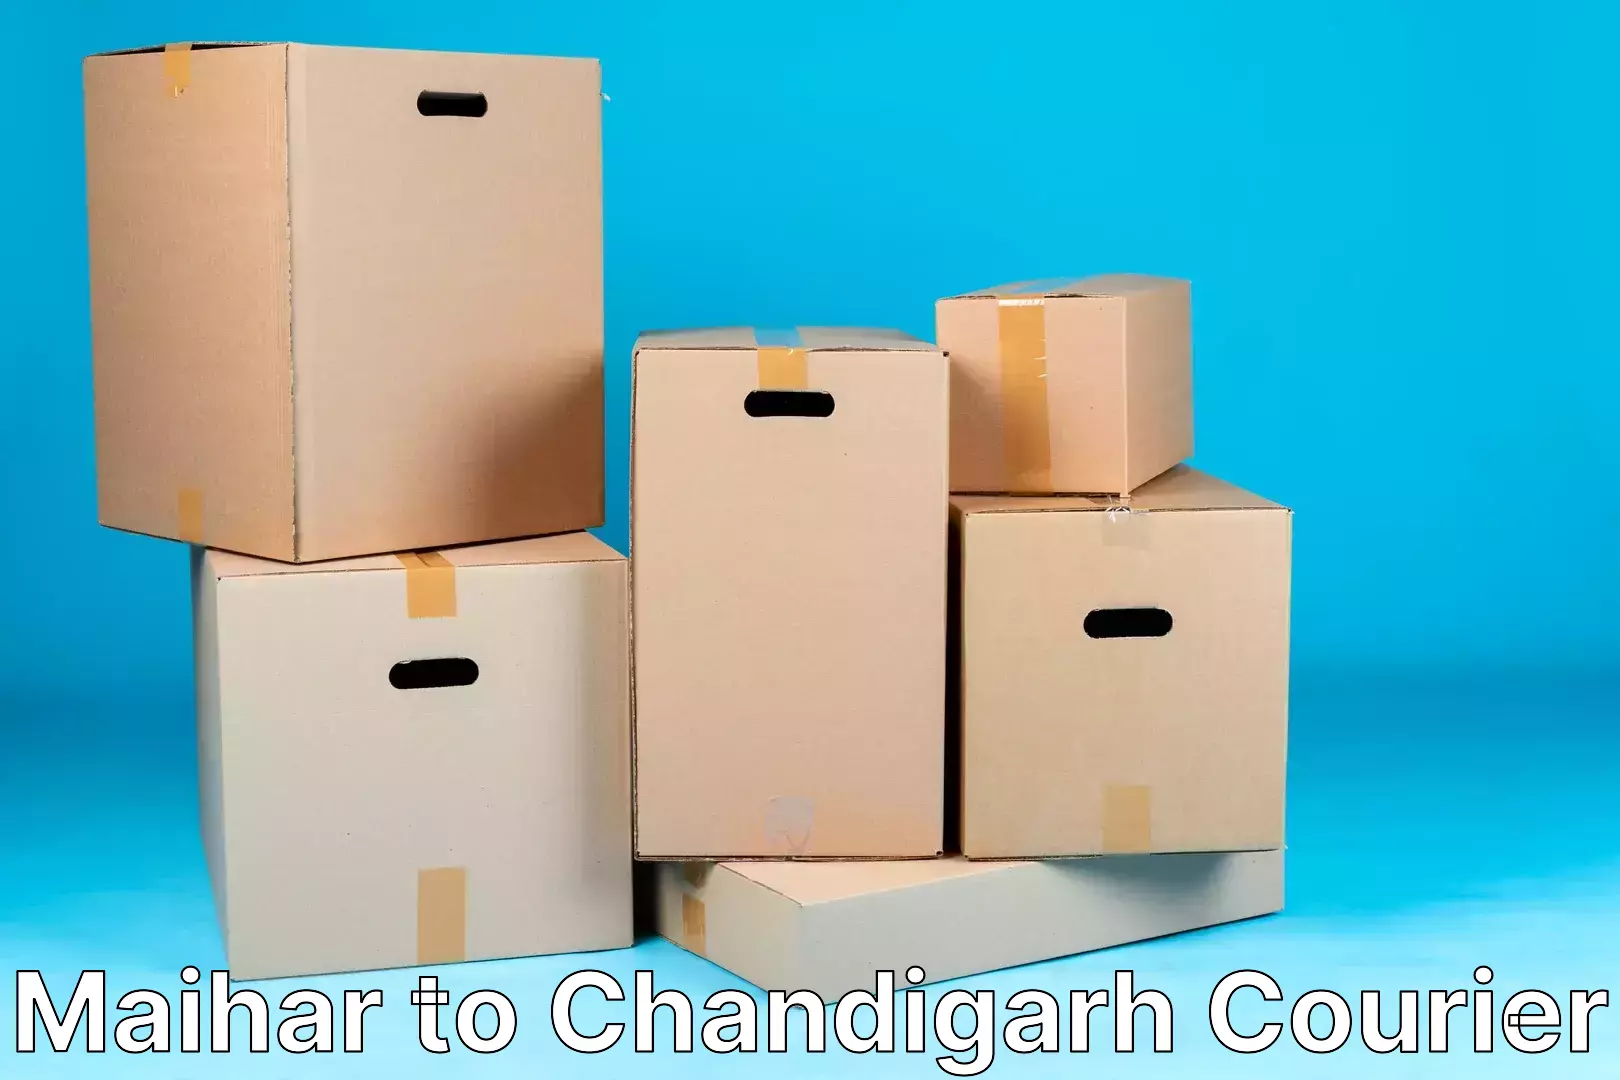 Courier service partnerships Maihar to Chandigarh